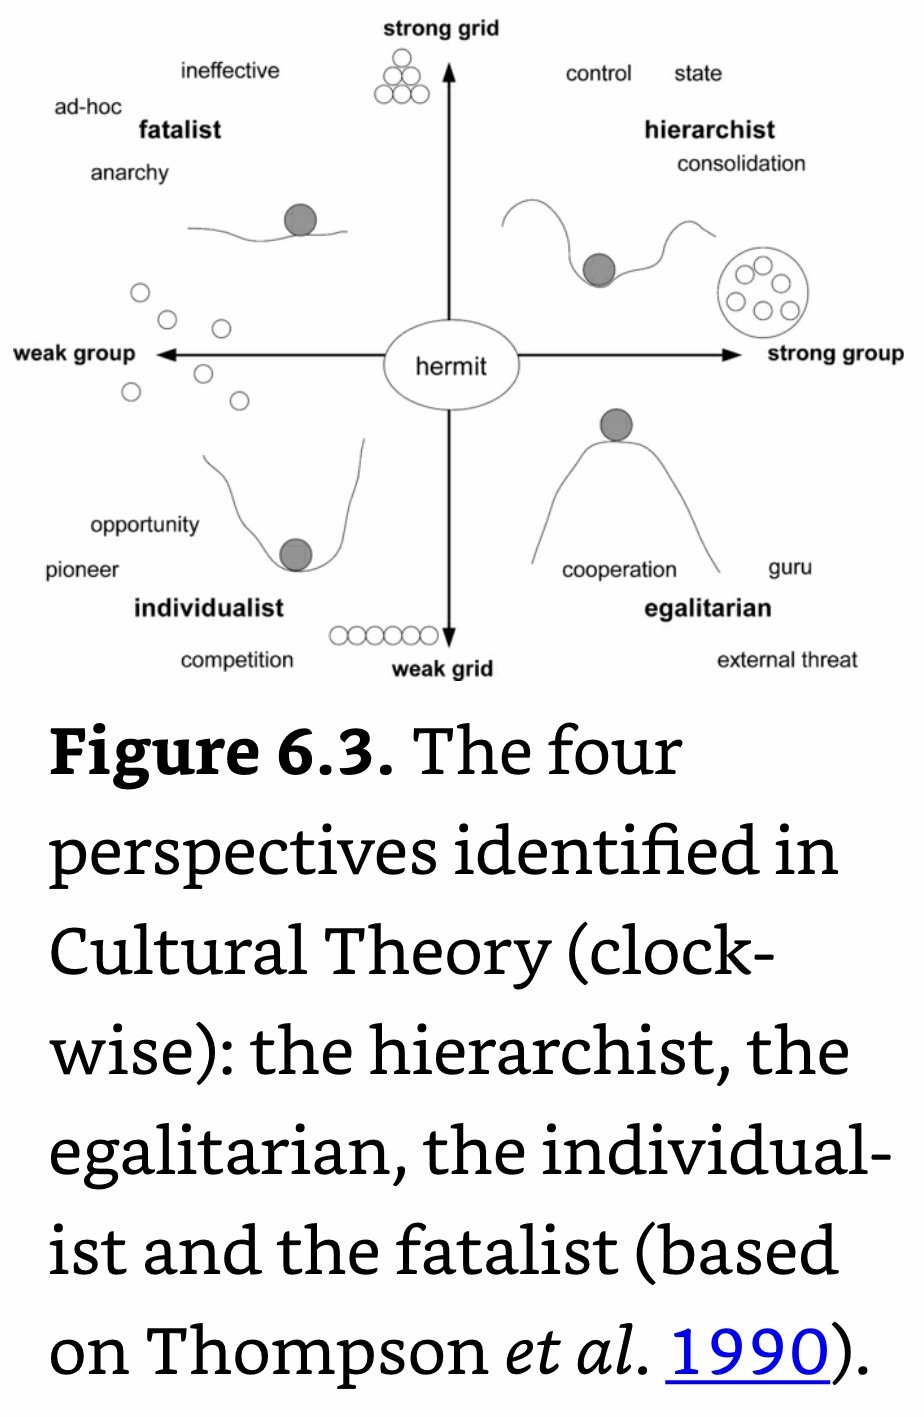 Cultural Theory Perspectives.jpeg